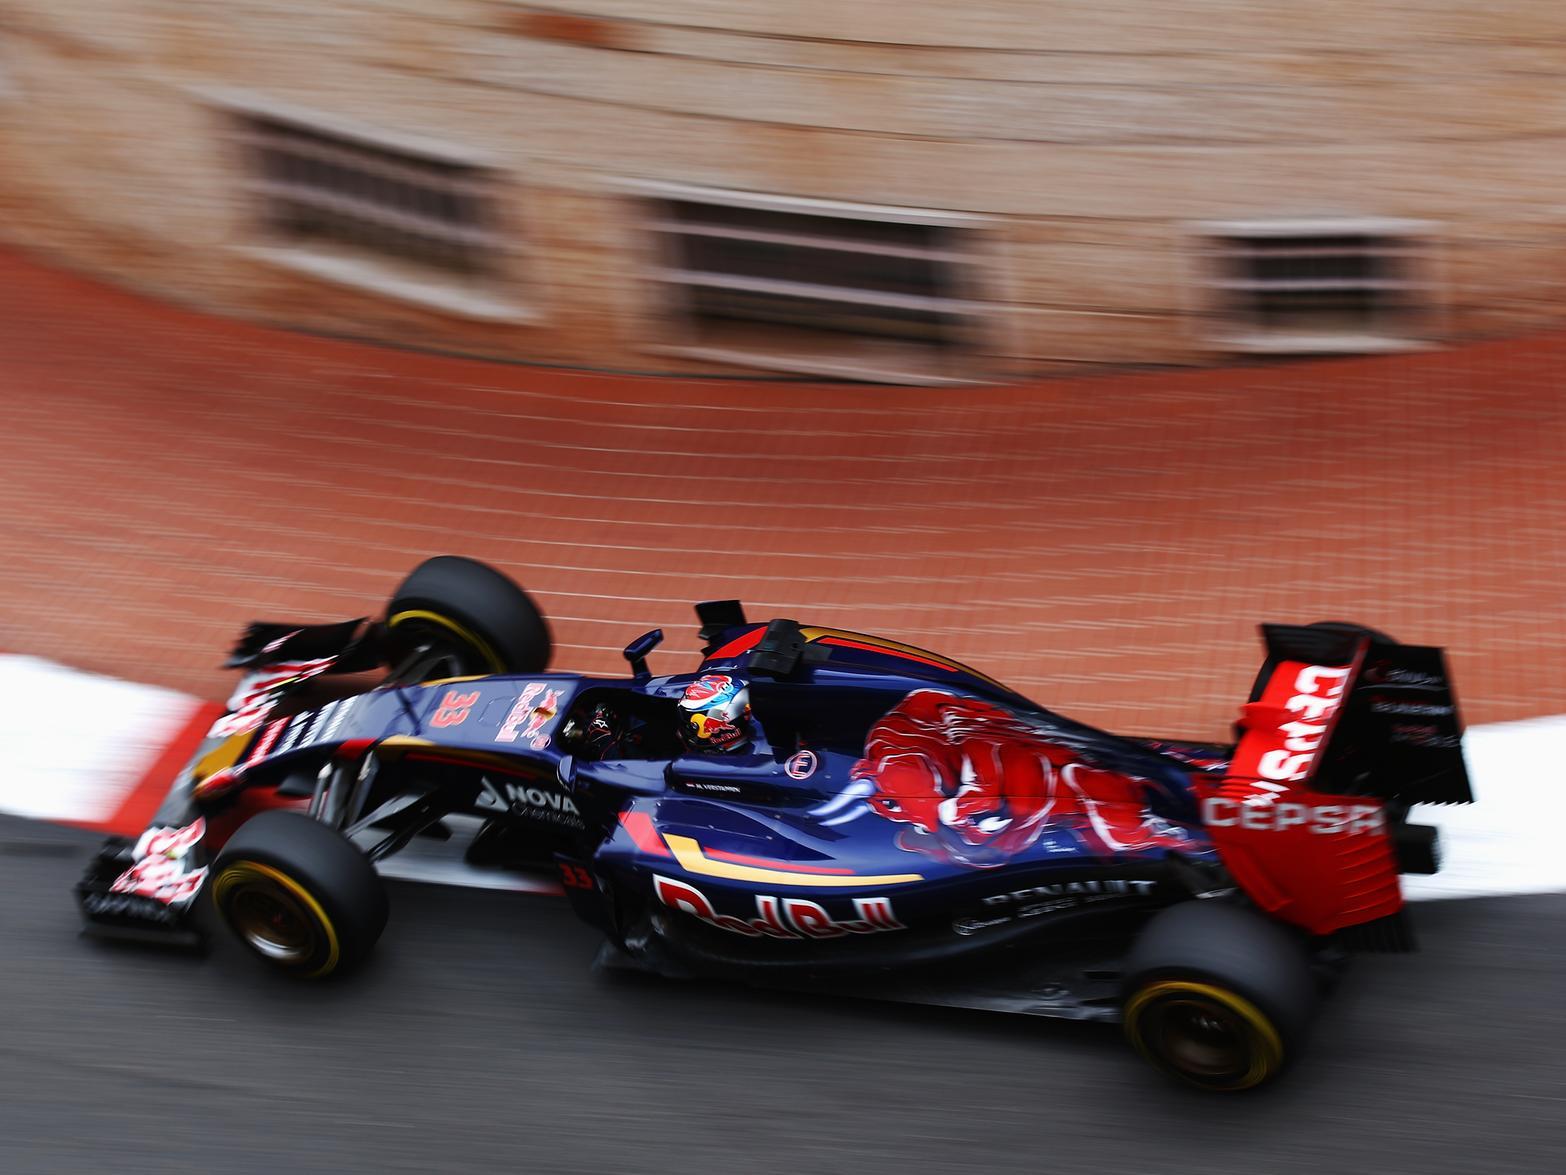 Verstappen's temperament was questioned on the streets of Monaco when he dramatically crashed with Romain Grosjean heading into Saint Devote.